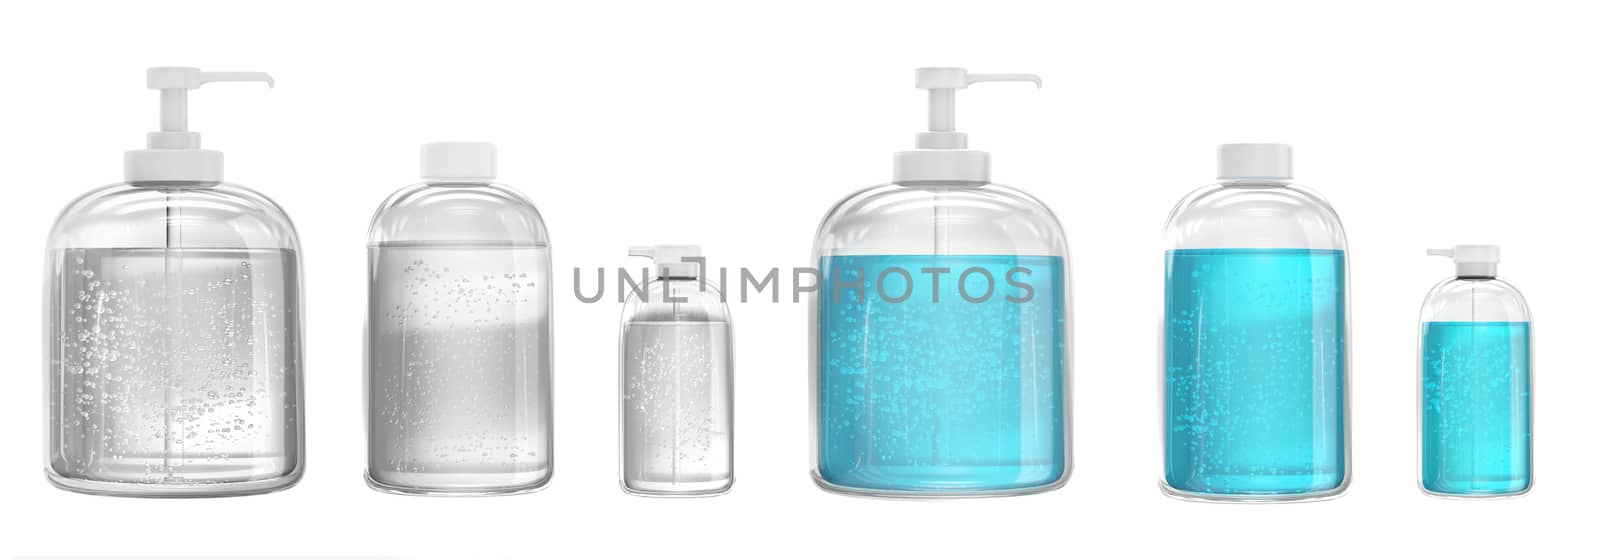 alcohol gel sanitizer cleaners by planktoncg